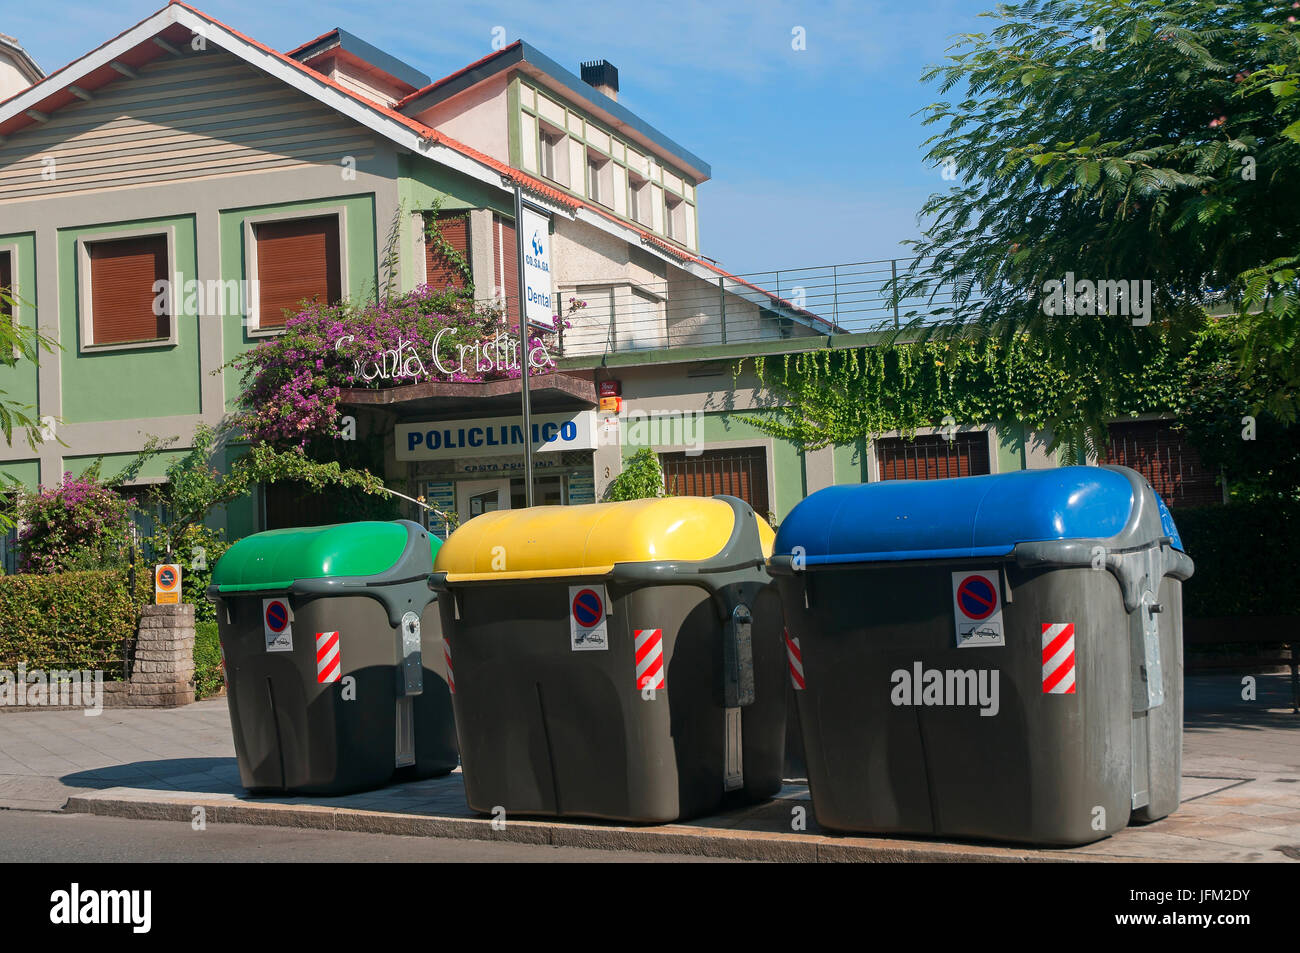 Point of selective waste collection, Orense, Region of Galicia, Spain, Europe Stock Photo